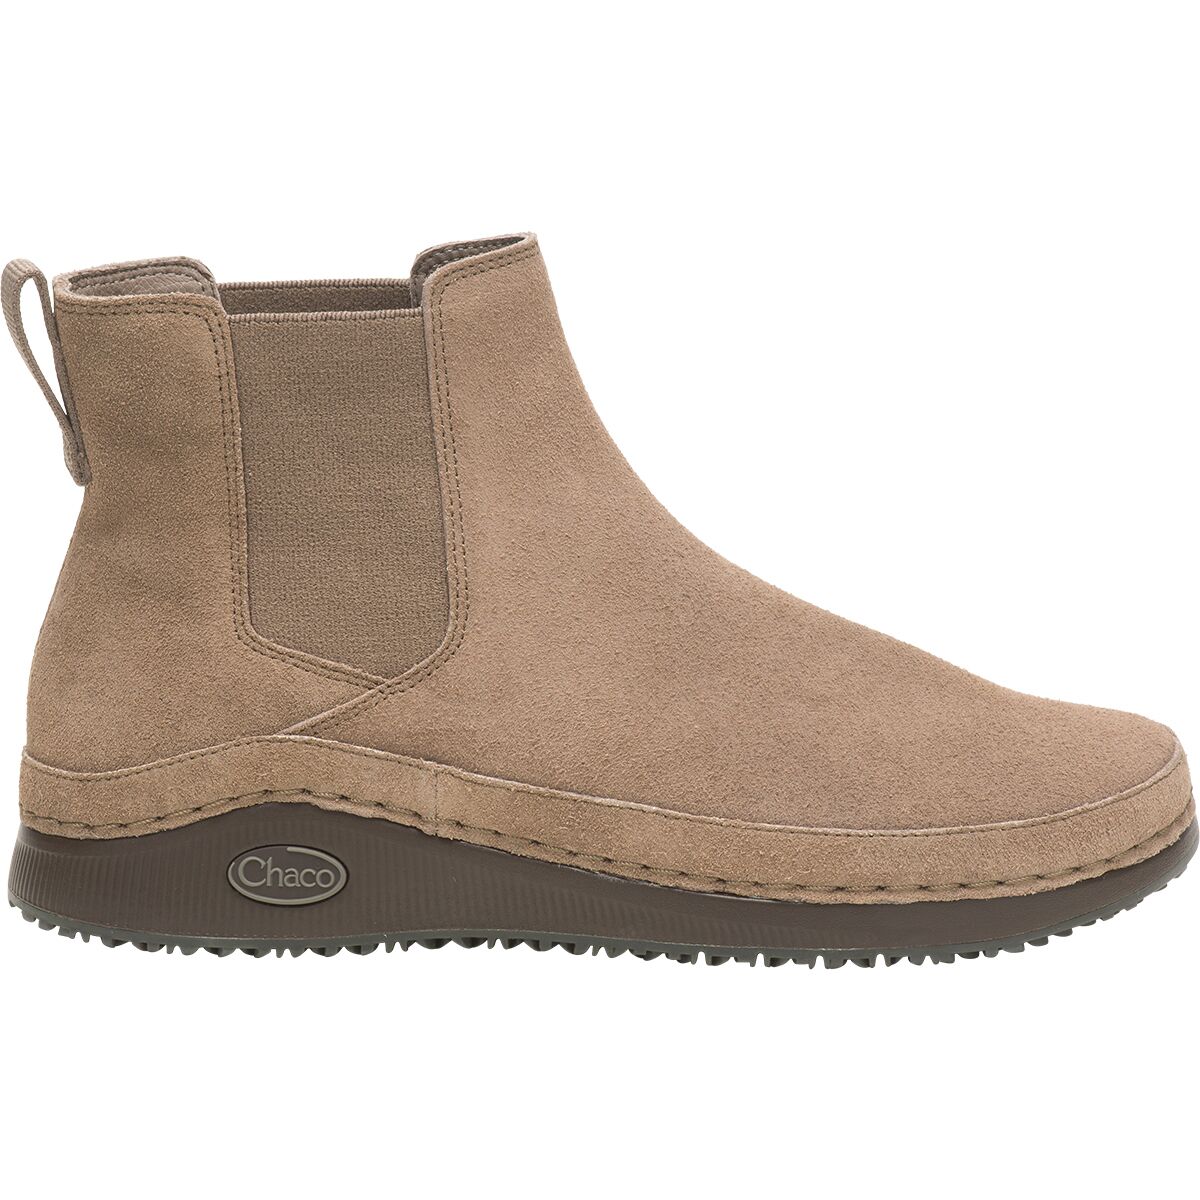 Chaco Paonia Chelsea Boot - Women's